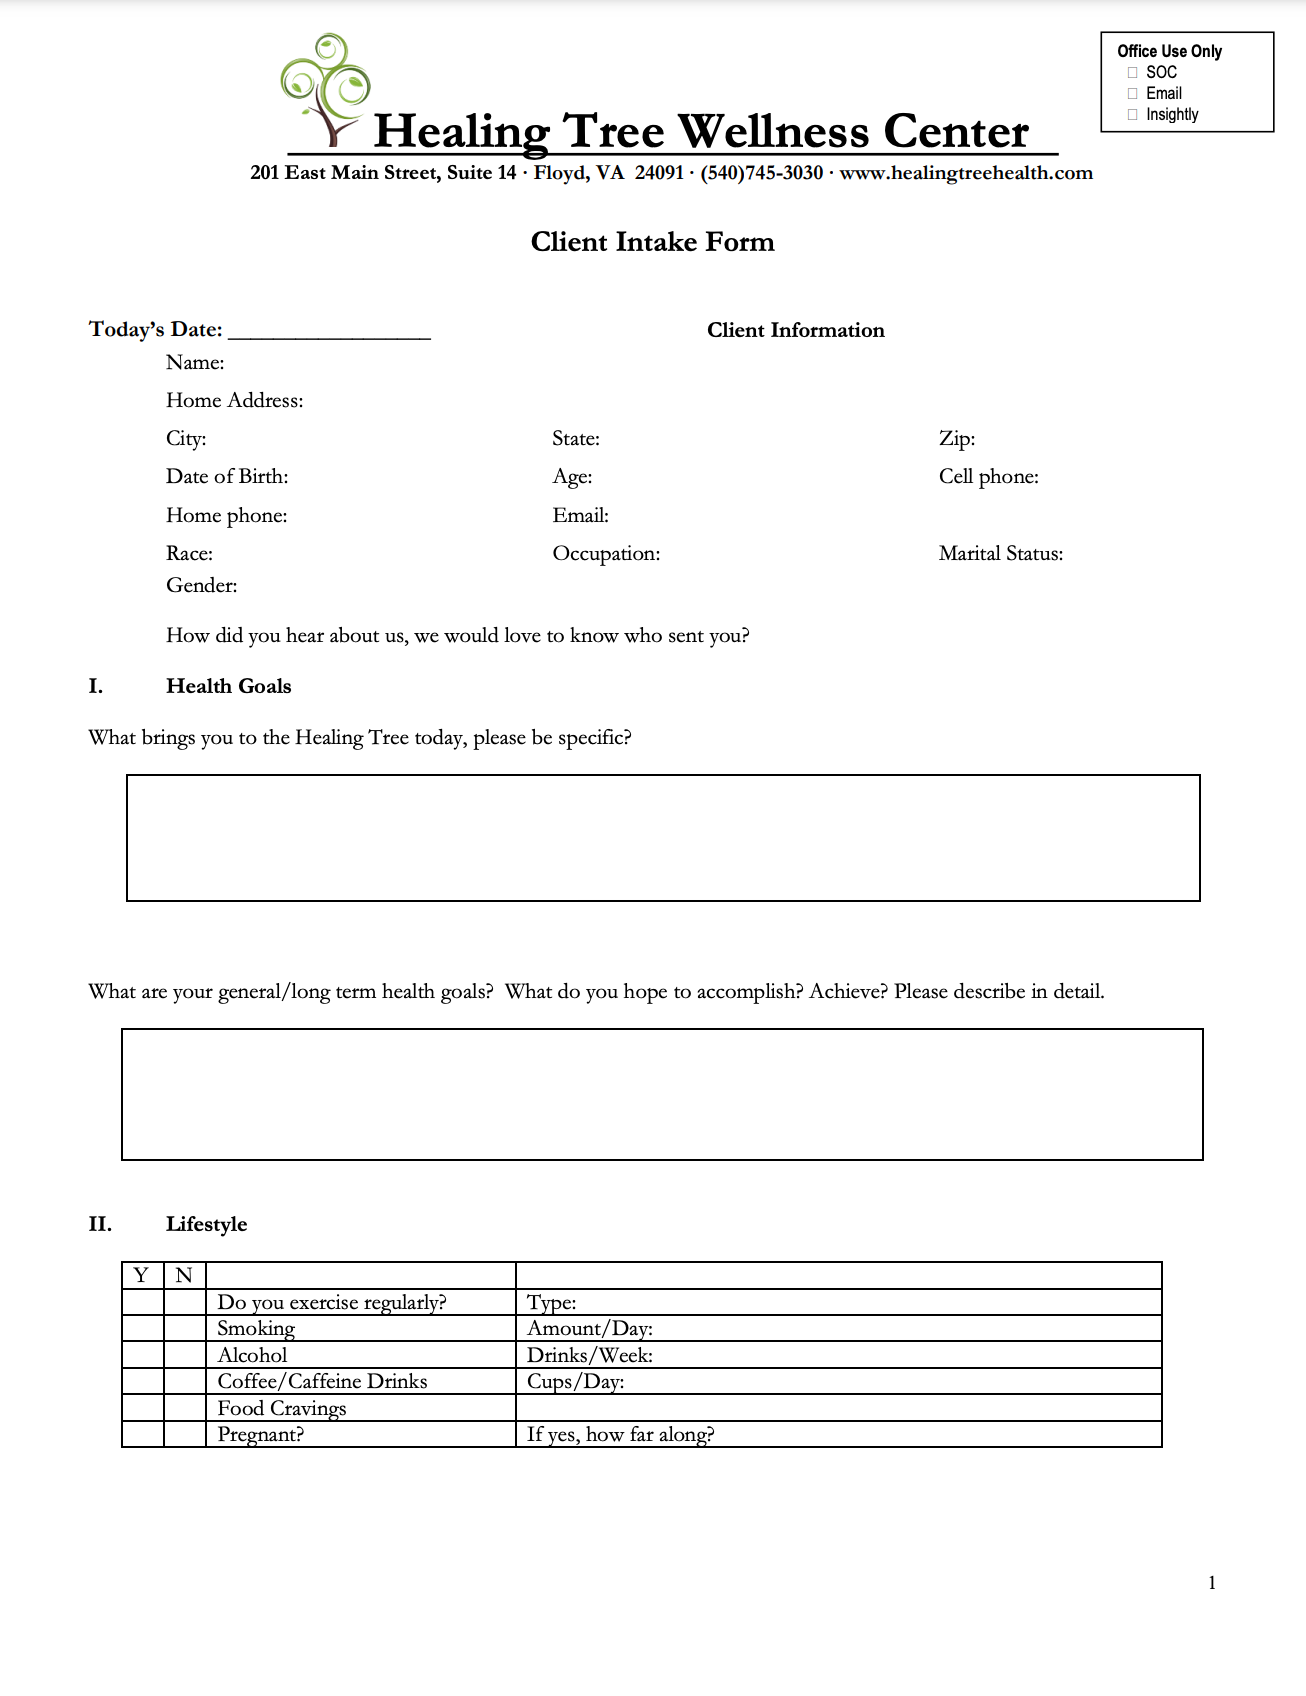 client-intake-form